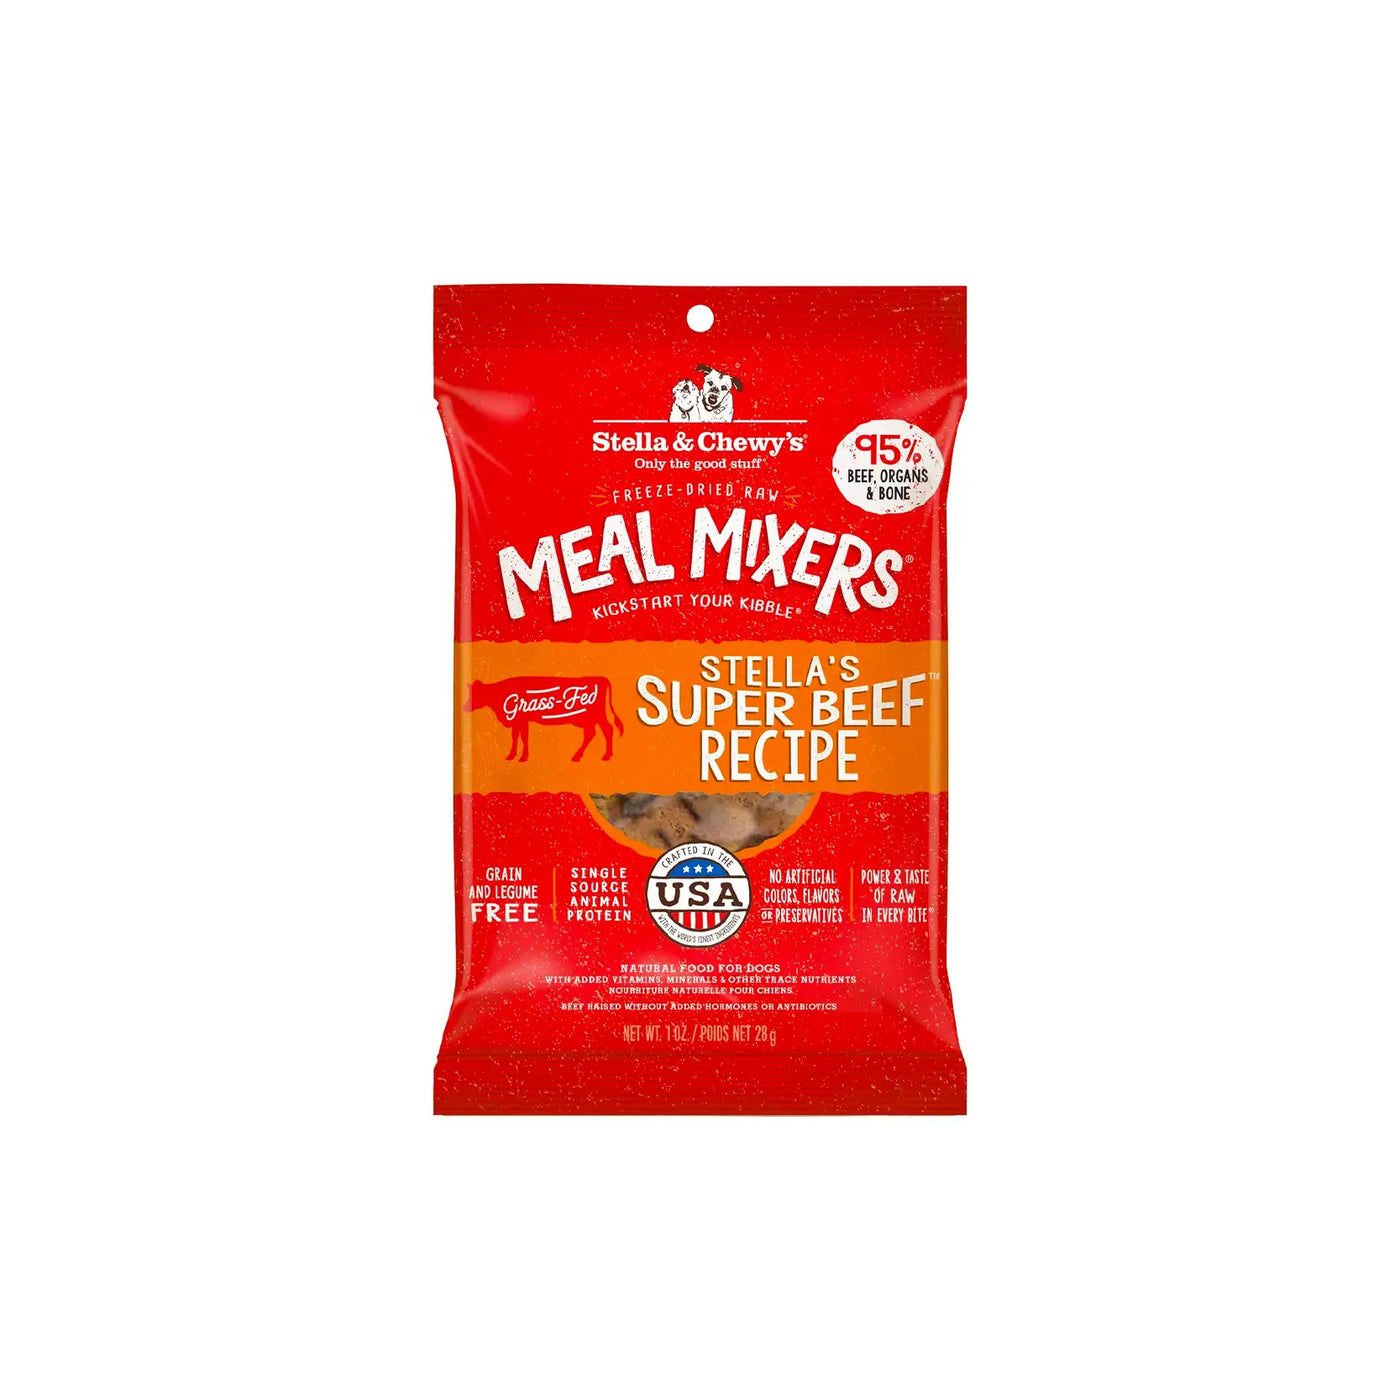 Stella & Chewy's - Freeze Dried Stella's Super Beef Meal Mixers